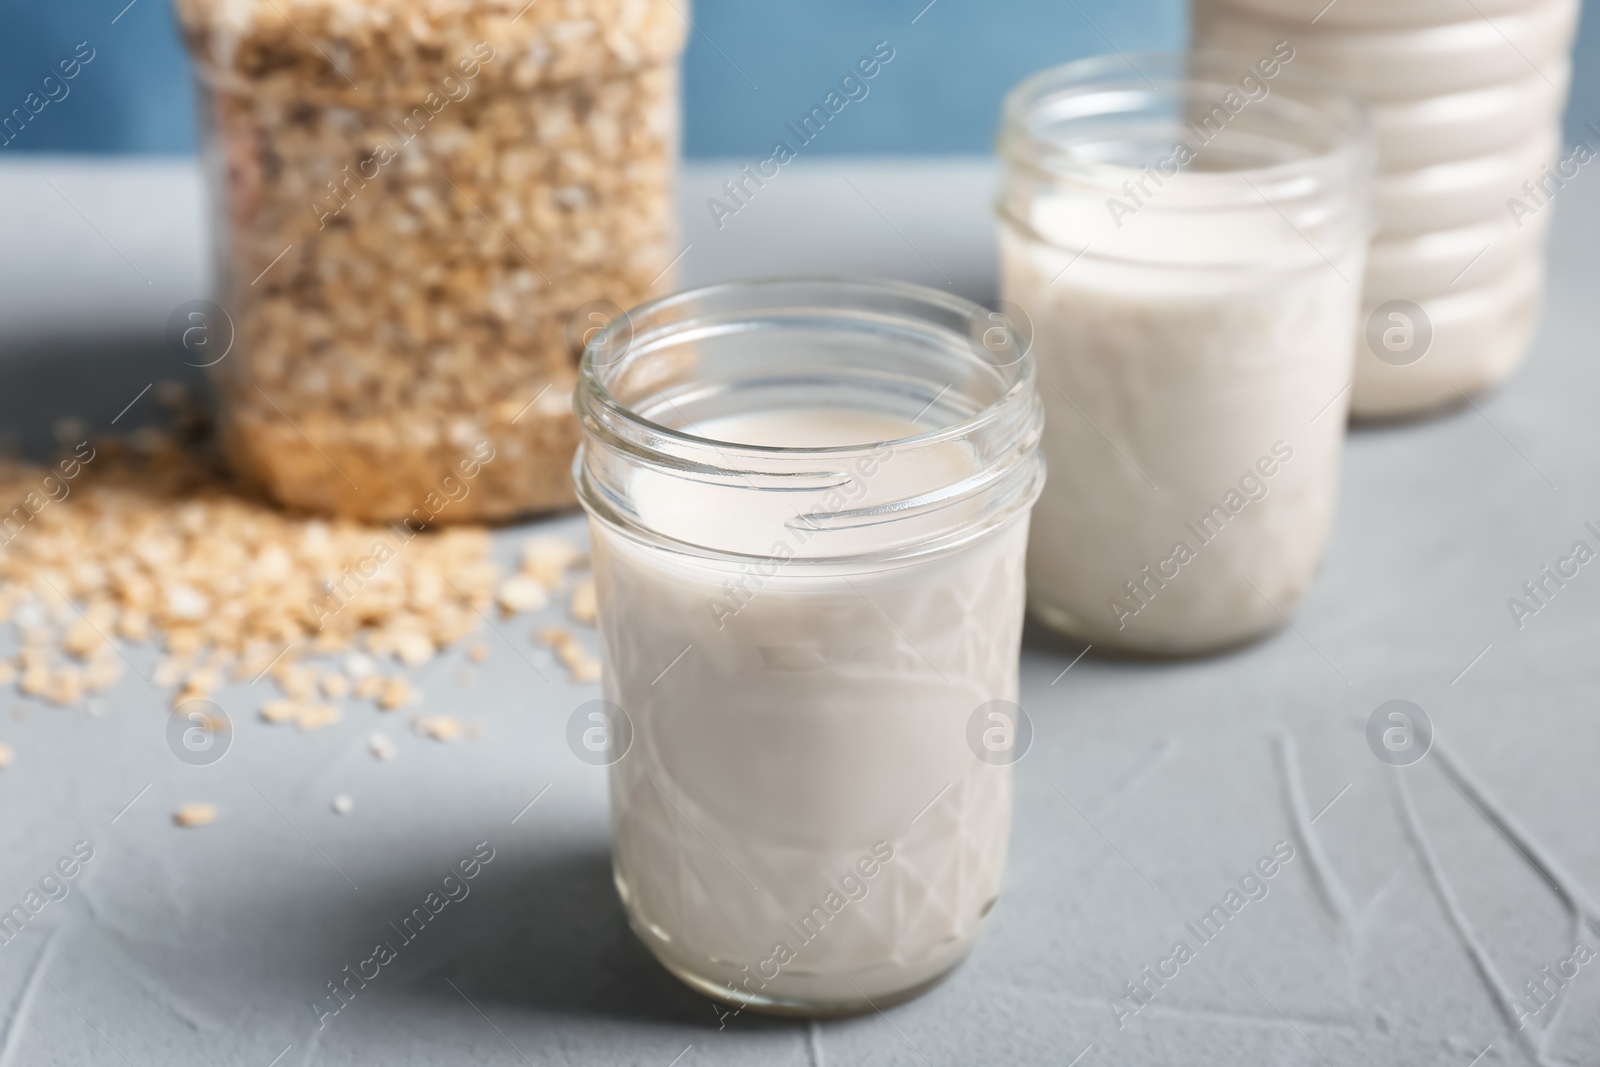 Photo of Jars with oat milk and flakes on table